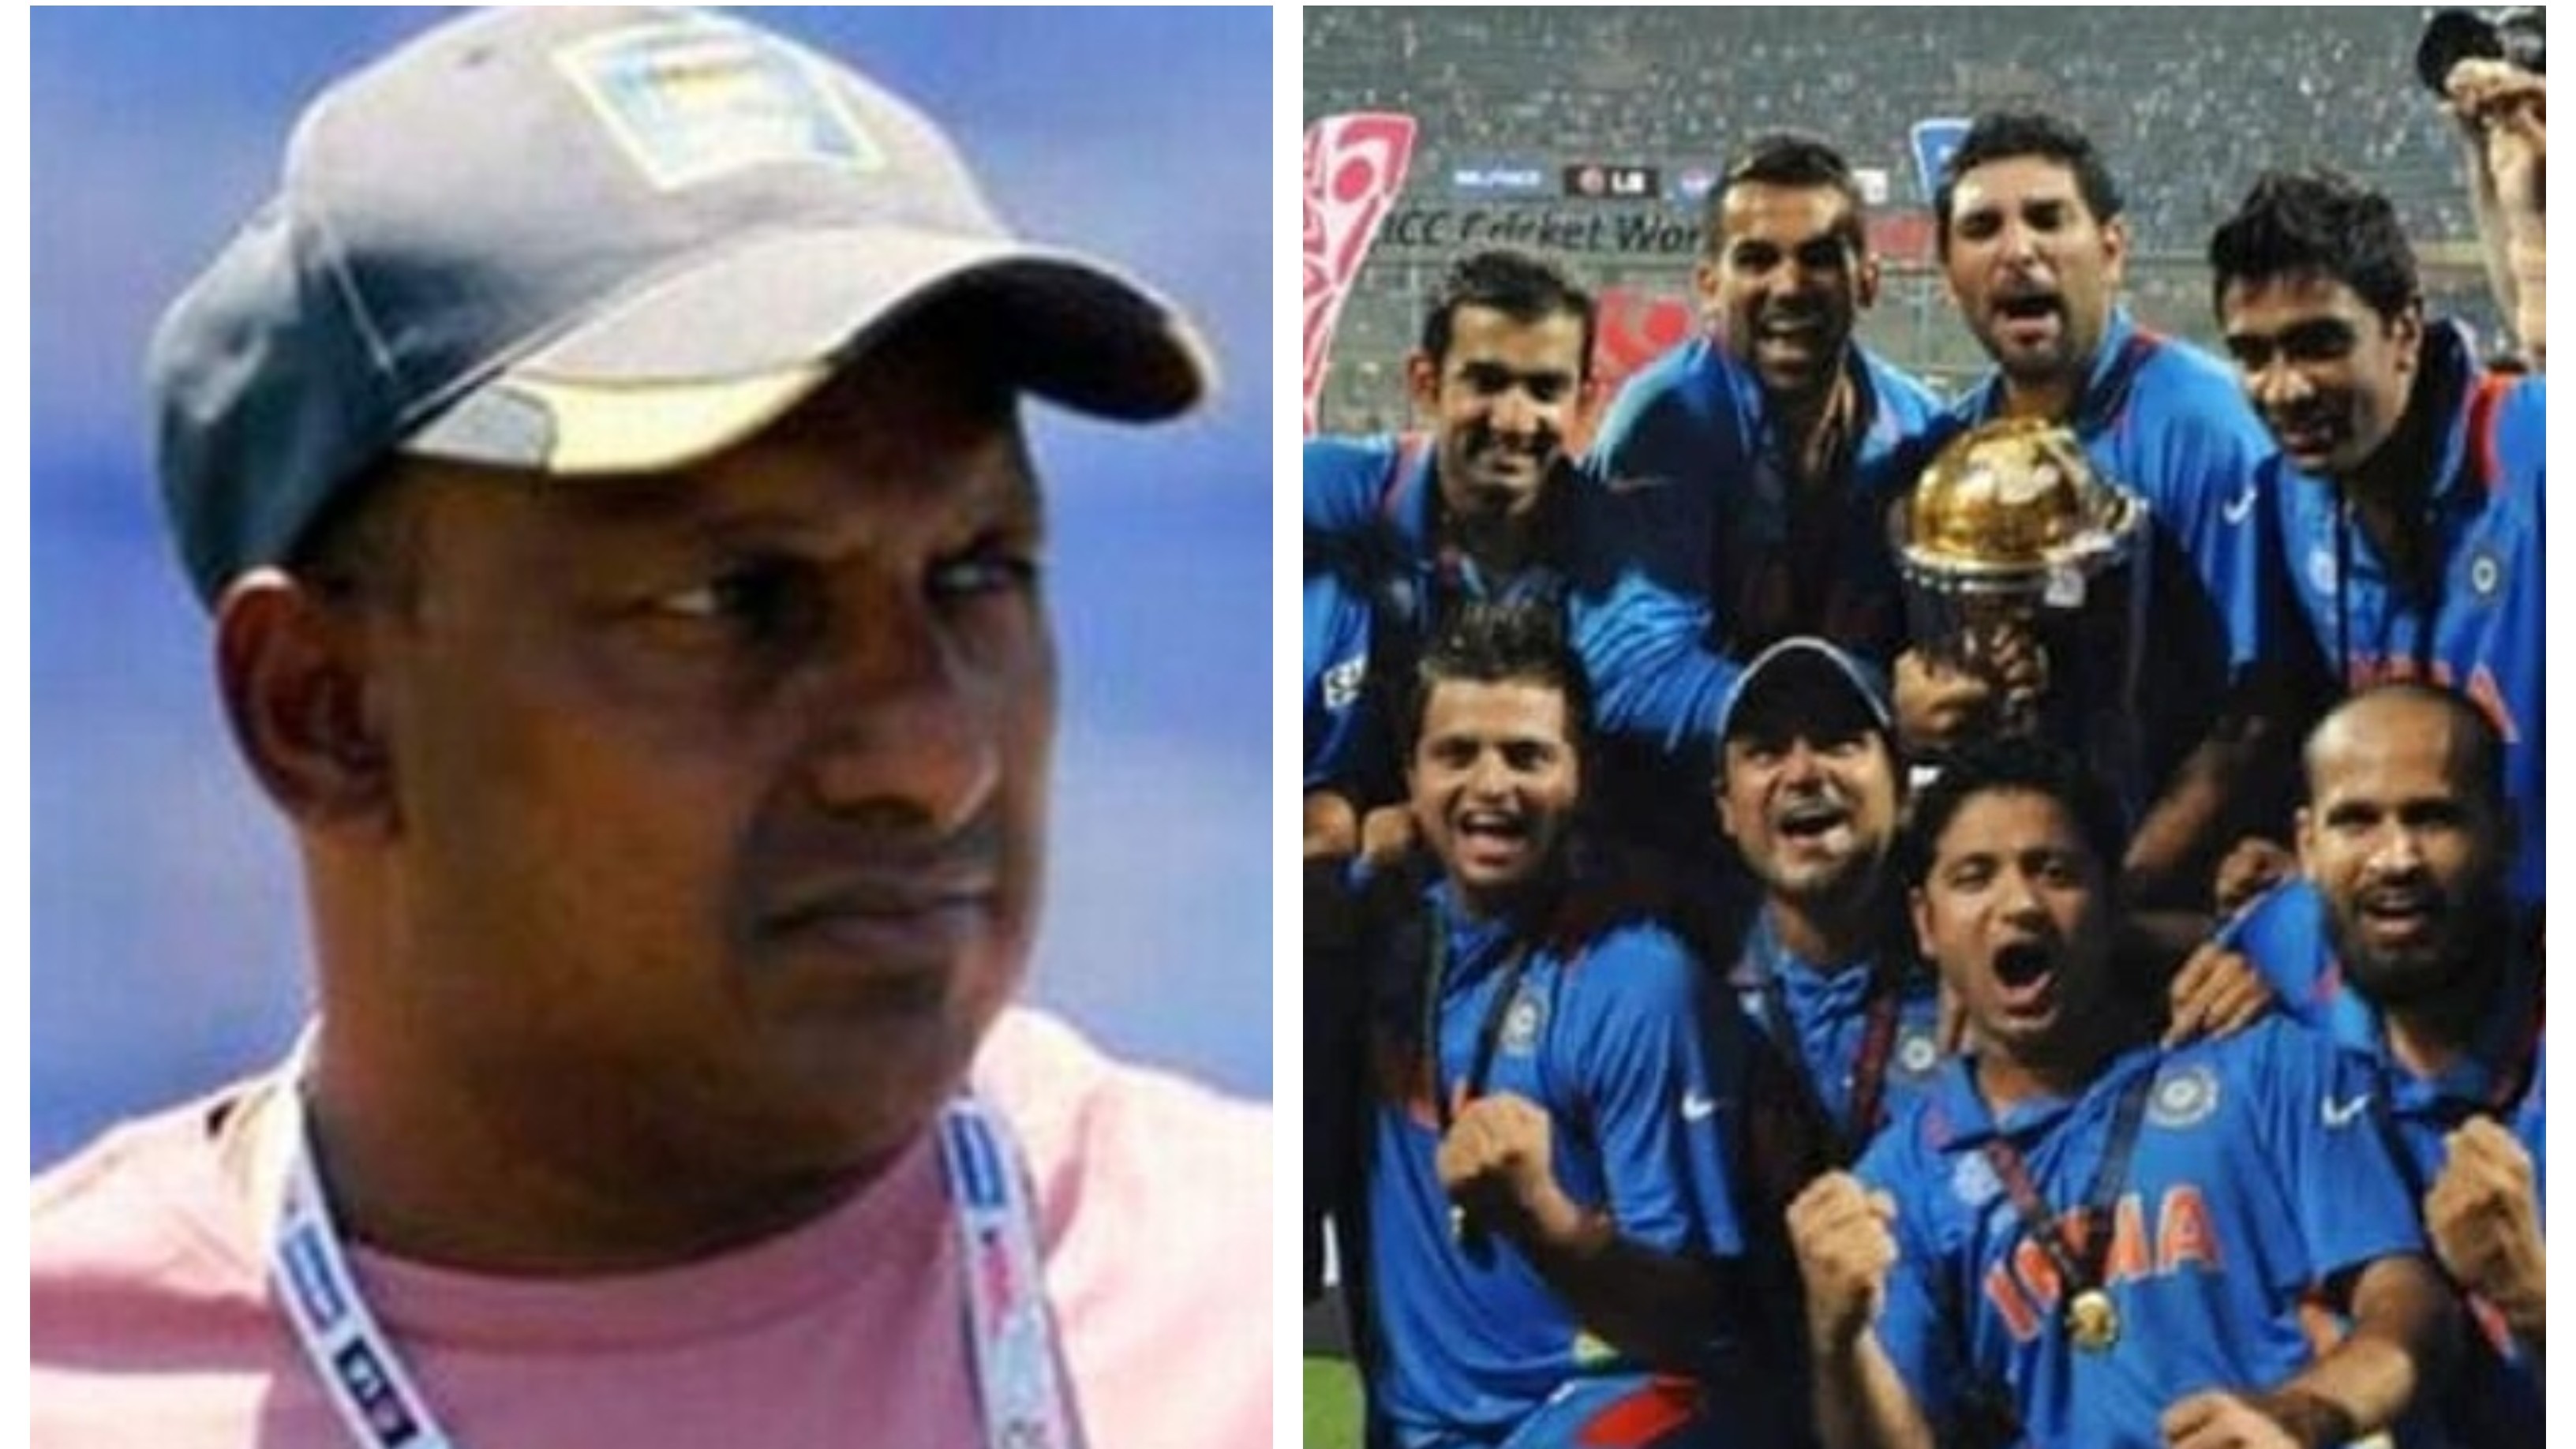 Aravinda de Silva urges BCCI, ICC and SLC to investigate match-fixing claims in 2011 World Cup final